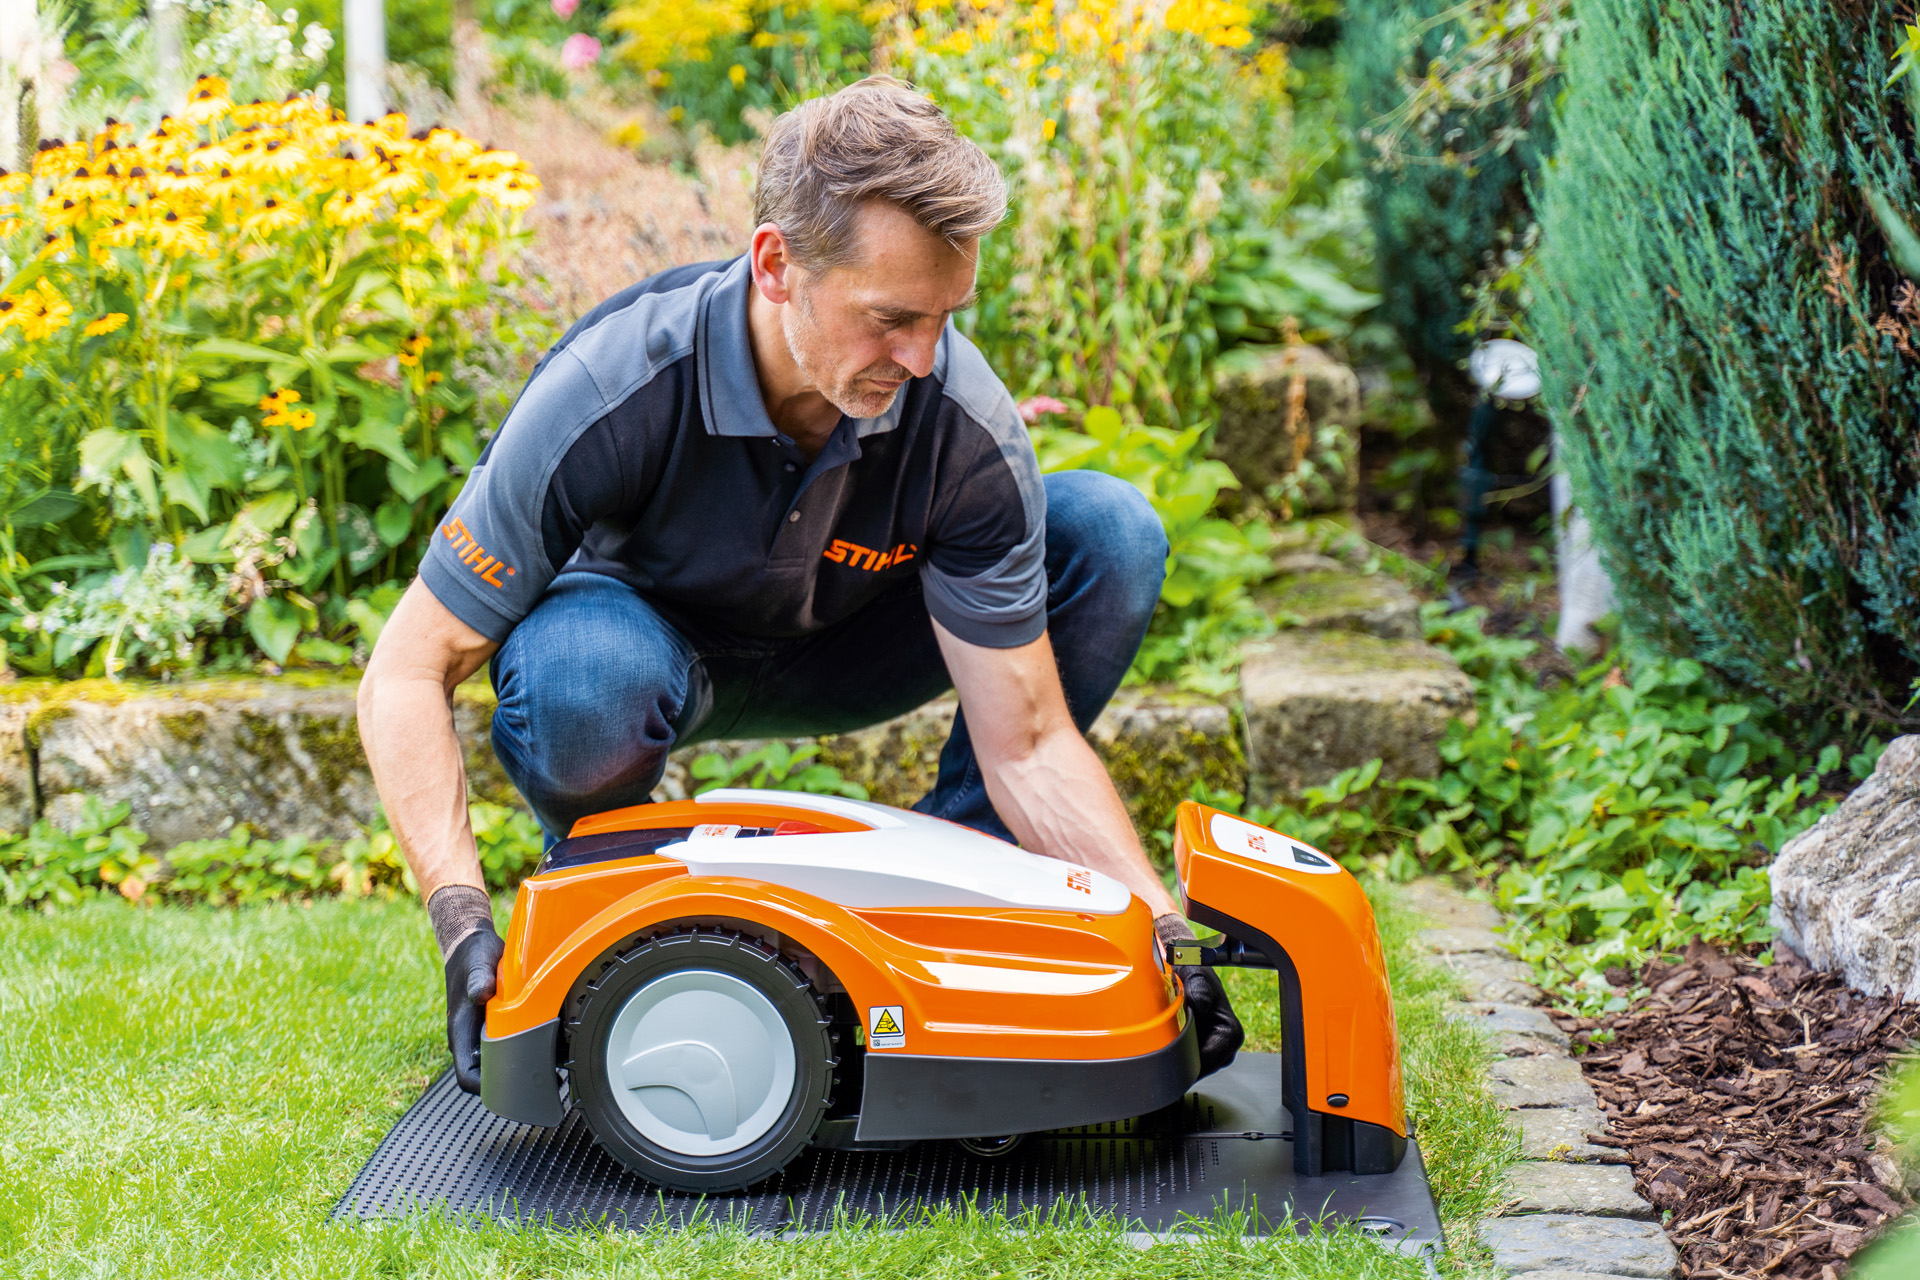 A STIHL dealer places a STIHL iMOW robotic mower in its charging station in a garden